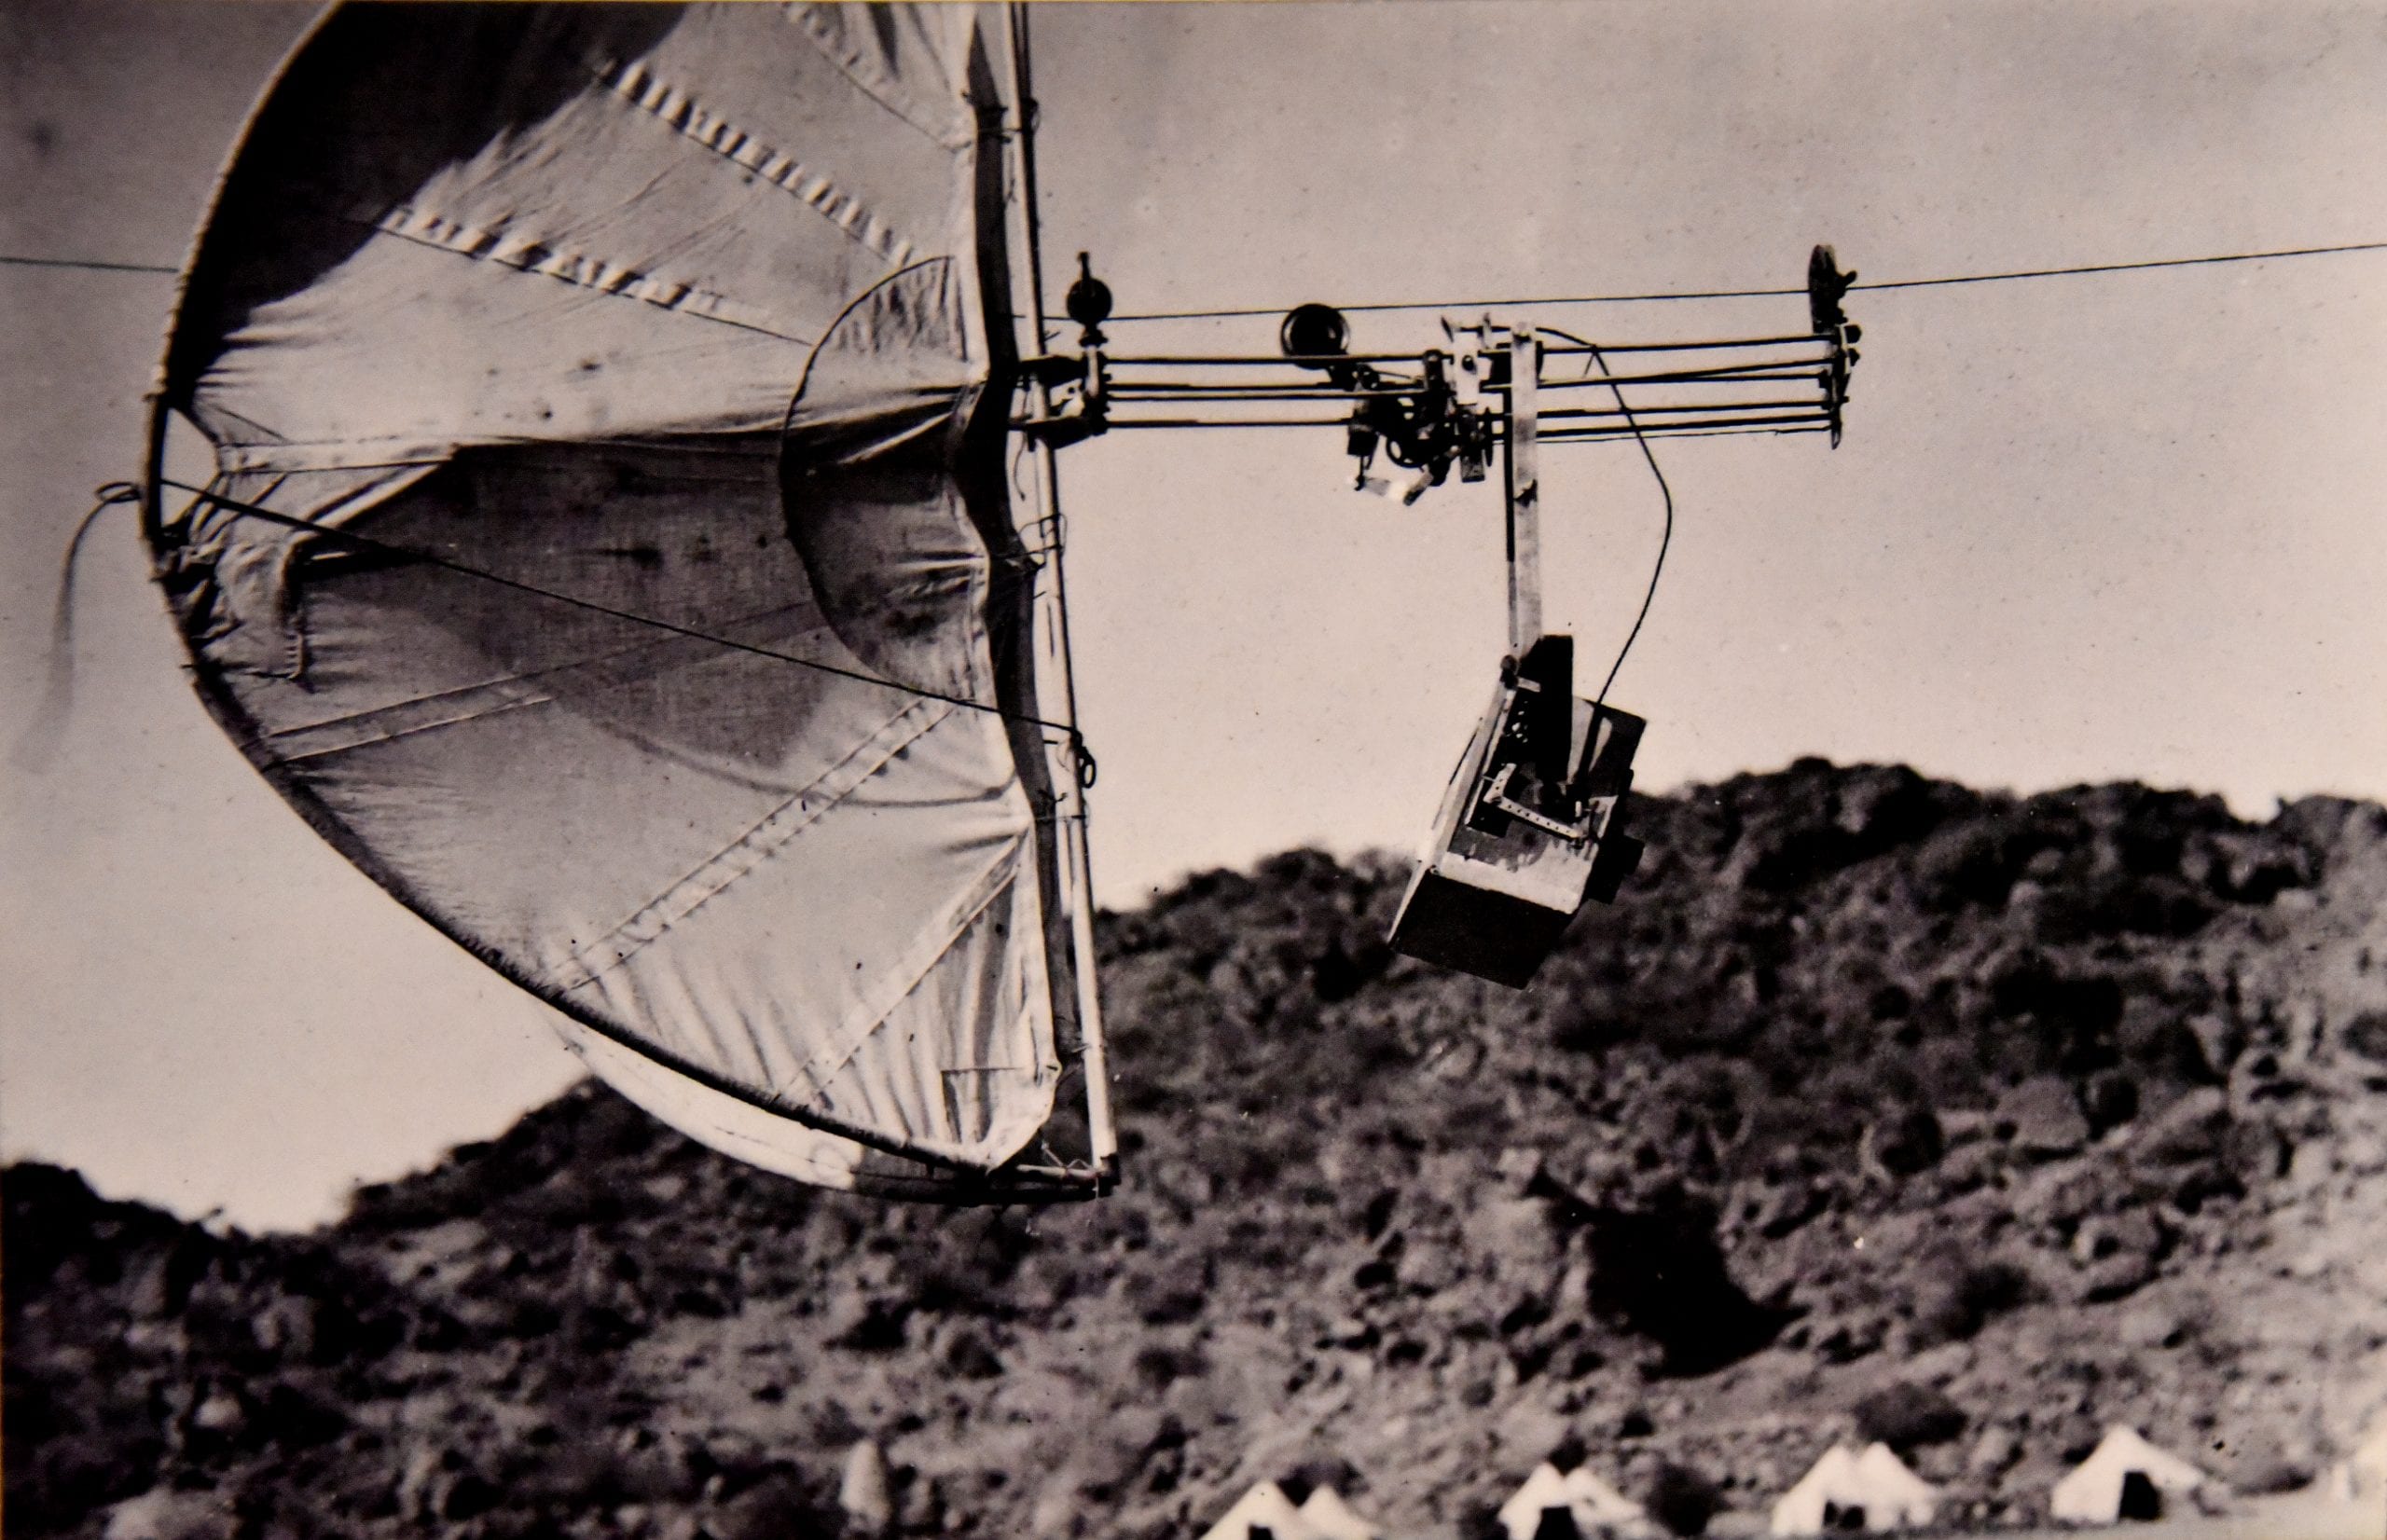 Henry_Wellcome's_photographic_automatic_kite_trolley_aerial_camera_deivce_used_at_Jebel_Moya,_Sudan,_1912-1913._Unknown_photographer._The_Wellcome_Collection,_London